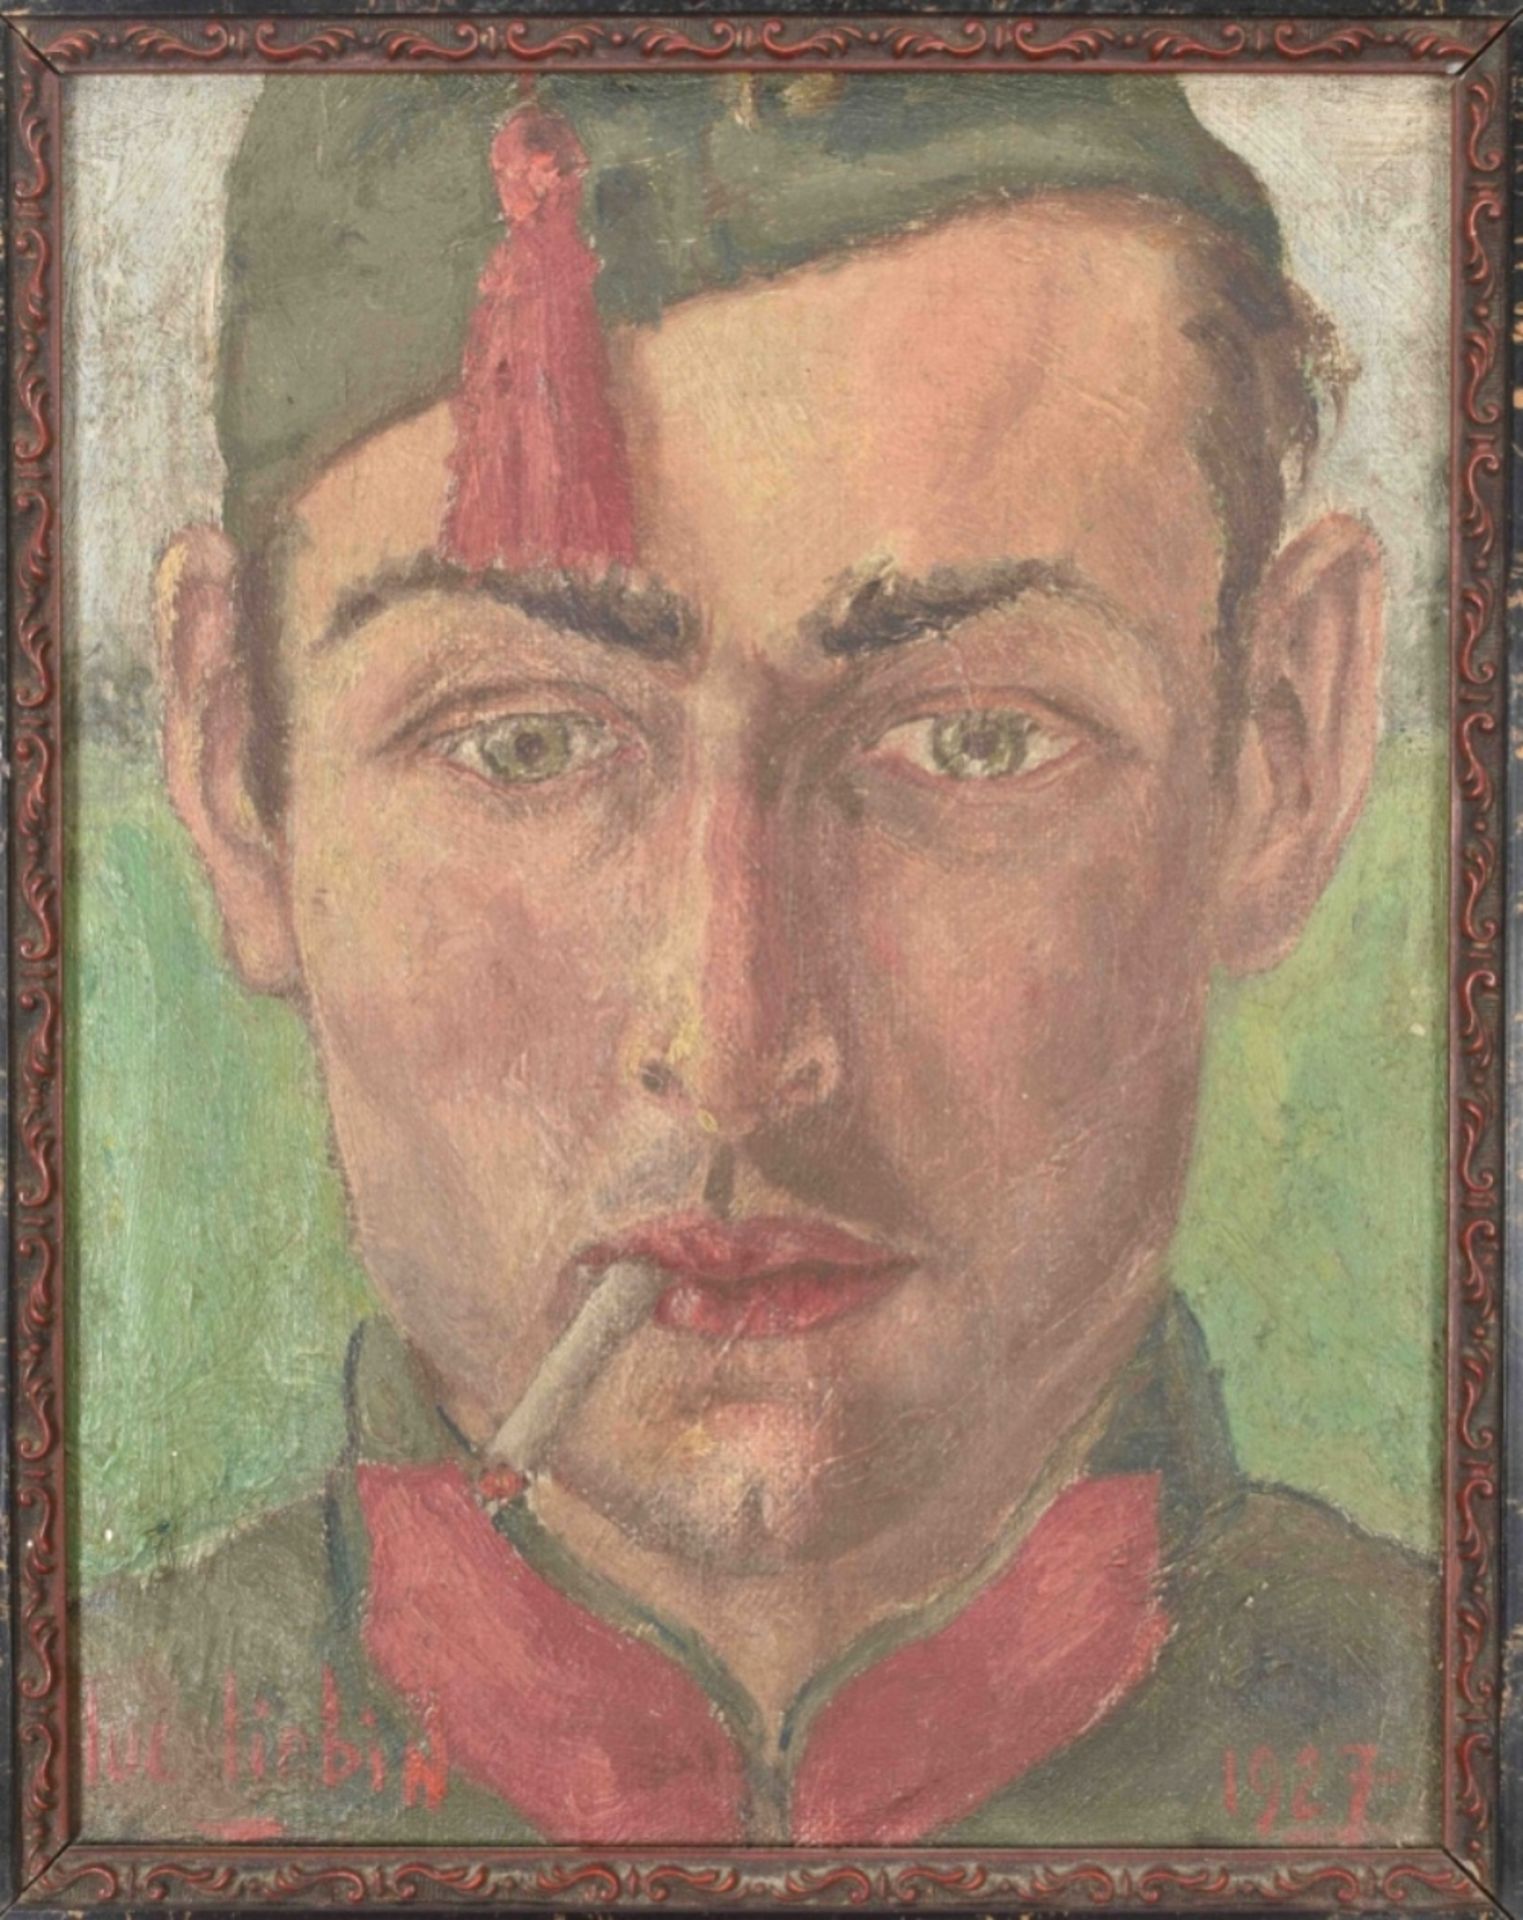 Luc Liebin (20th cent.). "Portrait of a young soldier smoking a cigarette" - Image 2 of 5